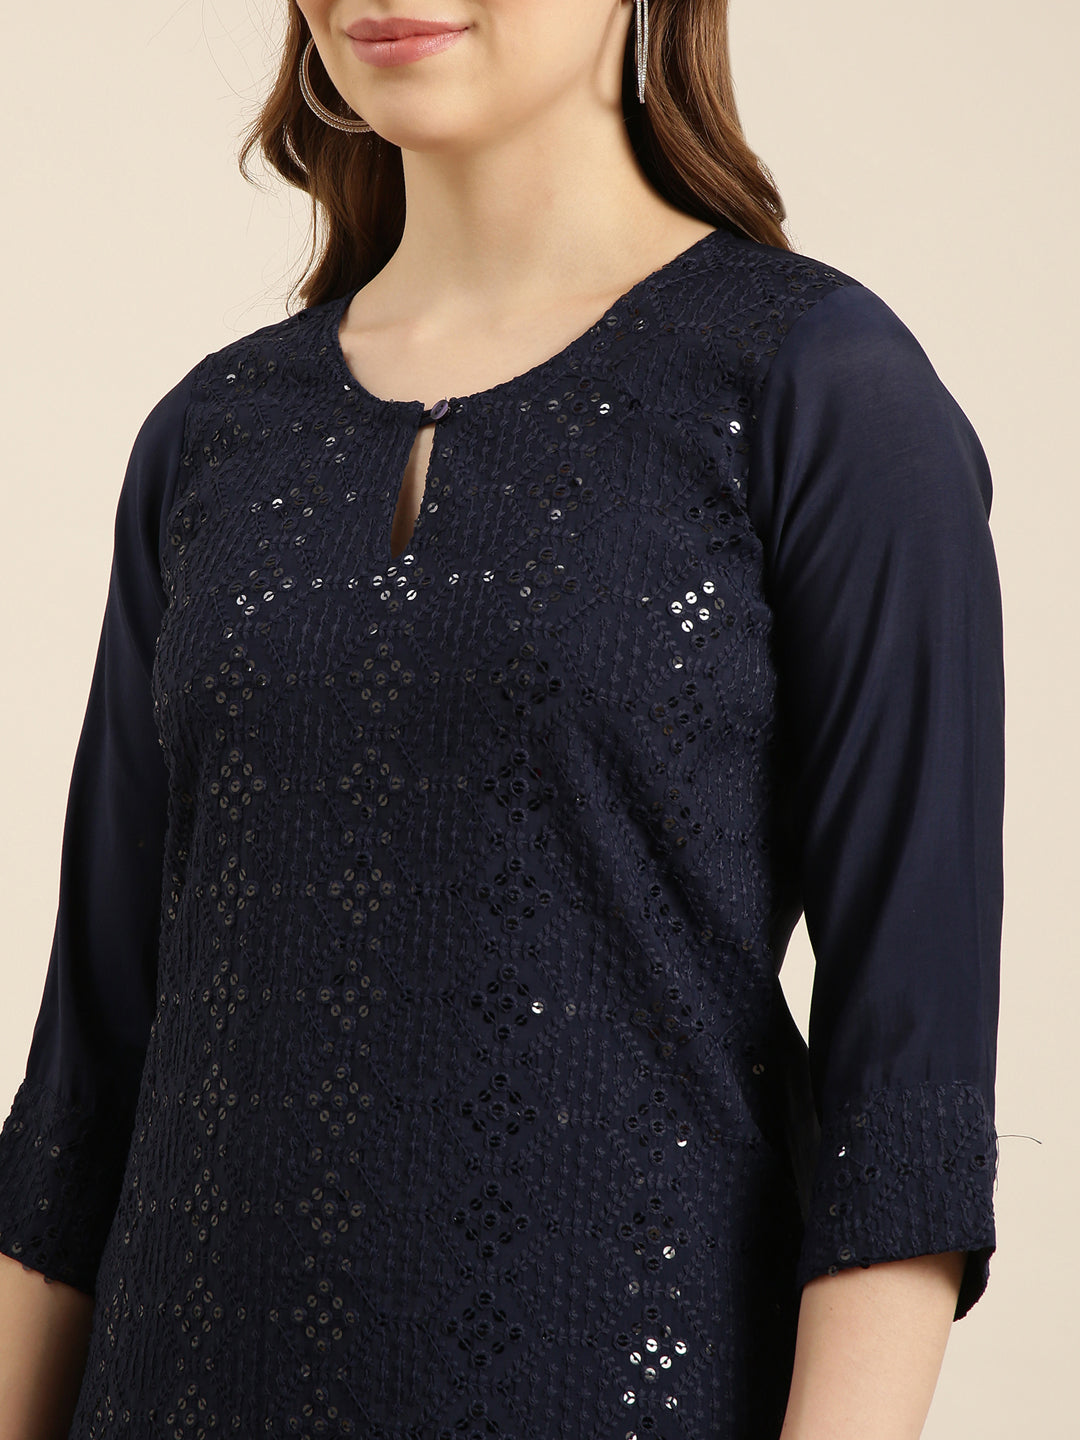 Women Straight Navy Blue Solid Kurta and Trousers Set Comes With Dupatta